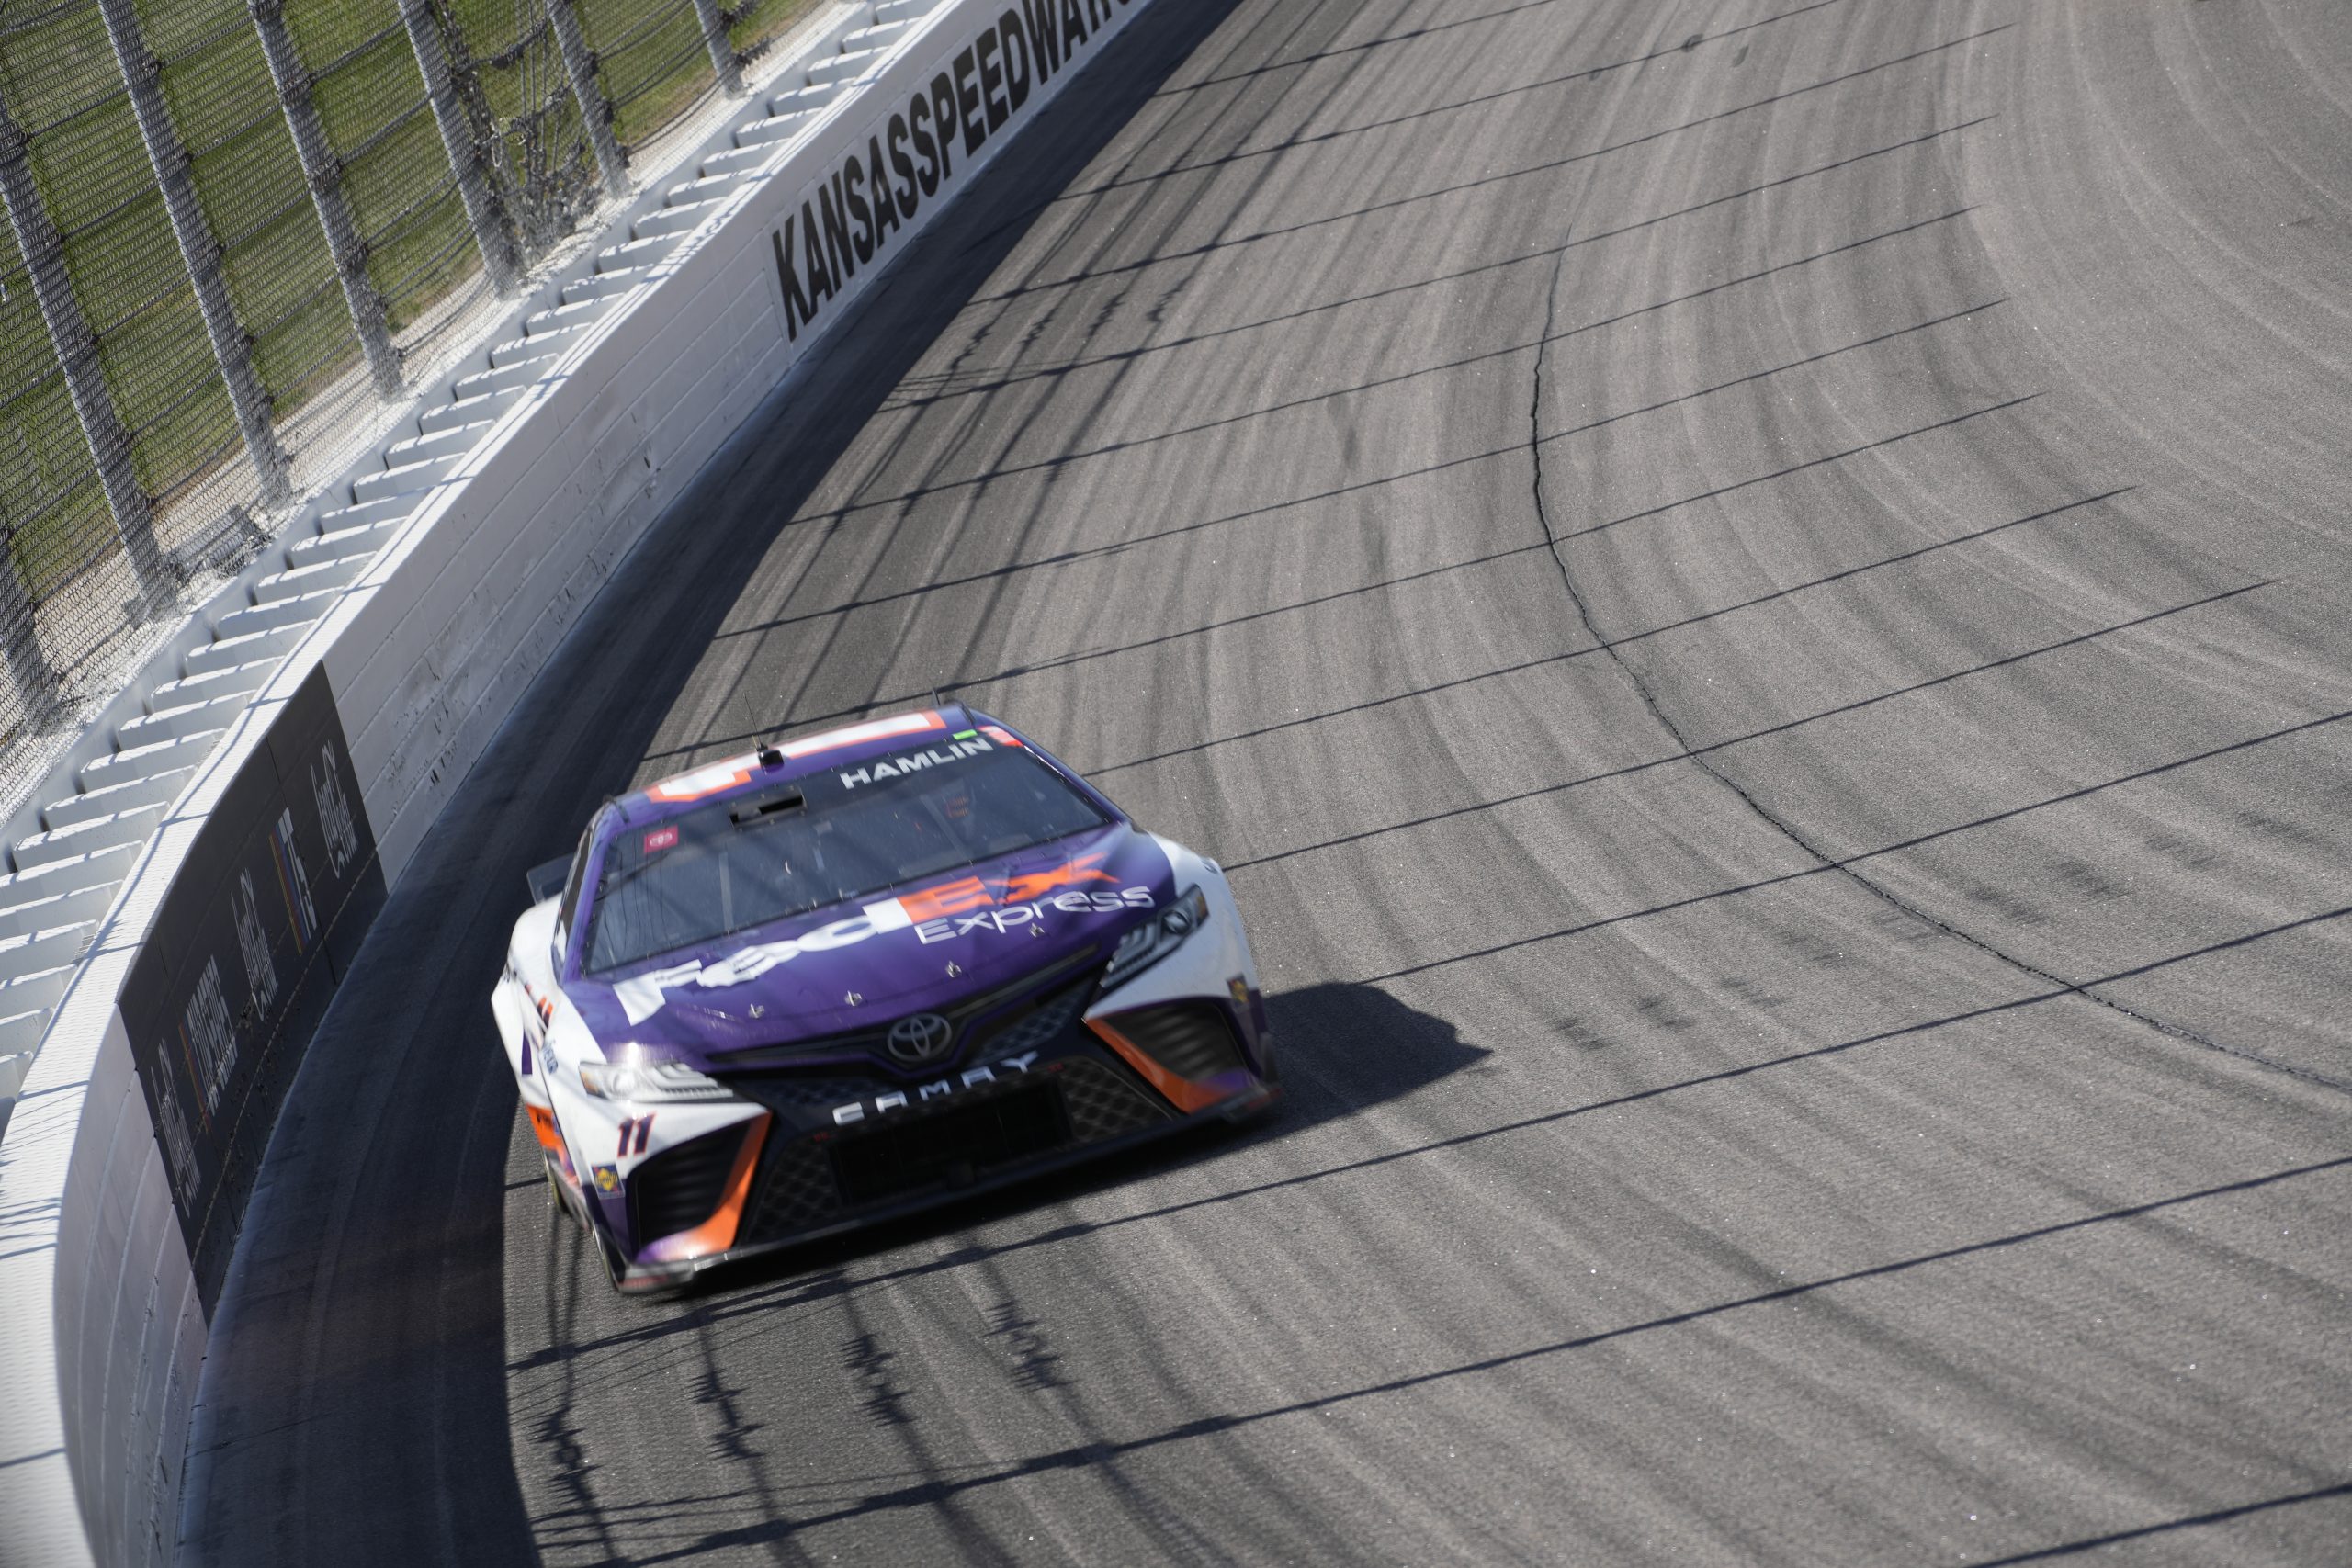 Hamlin's perseverance paid off in an exciting race at Kansas Speedway. (Photo: Christopher Vargas | The Podium Finish)